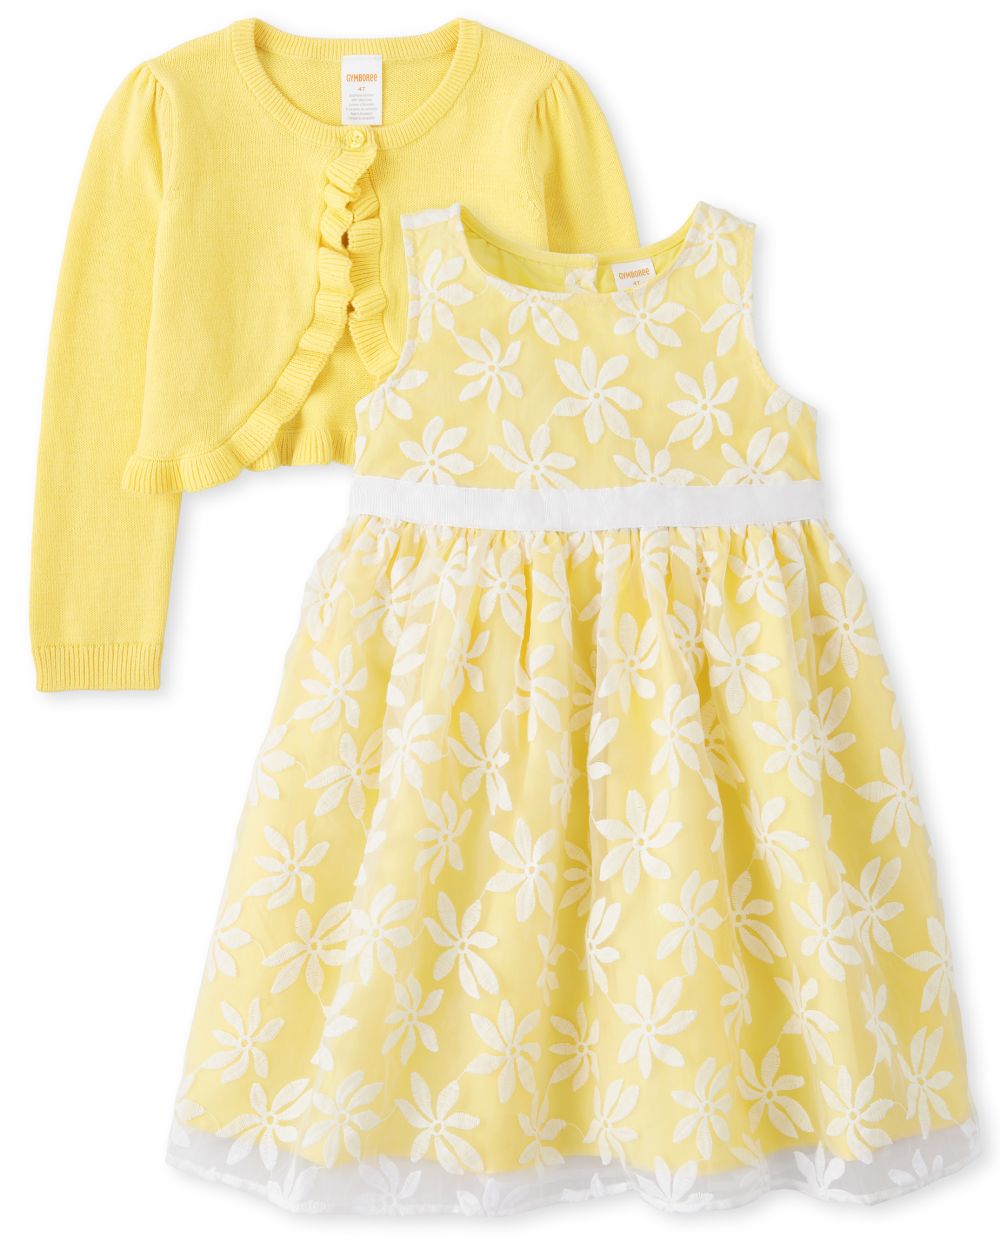 Toddler girls Easter dress and cardigan outfit